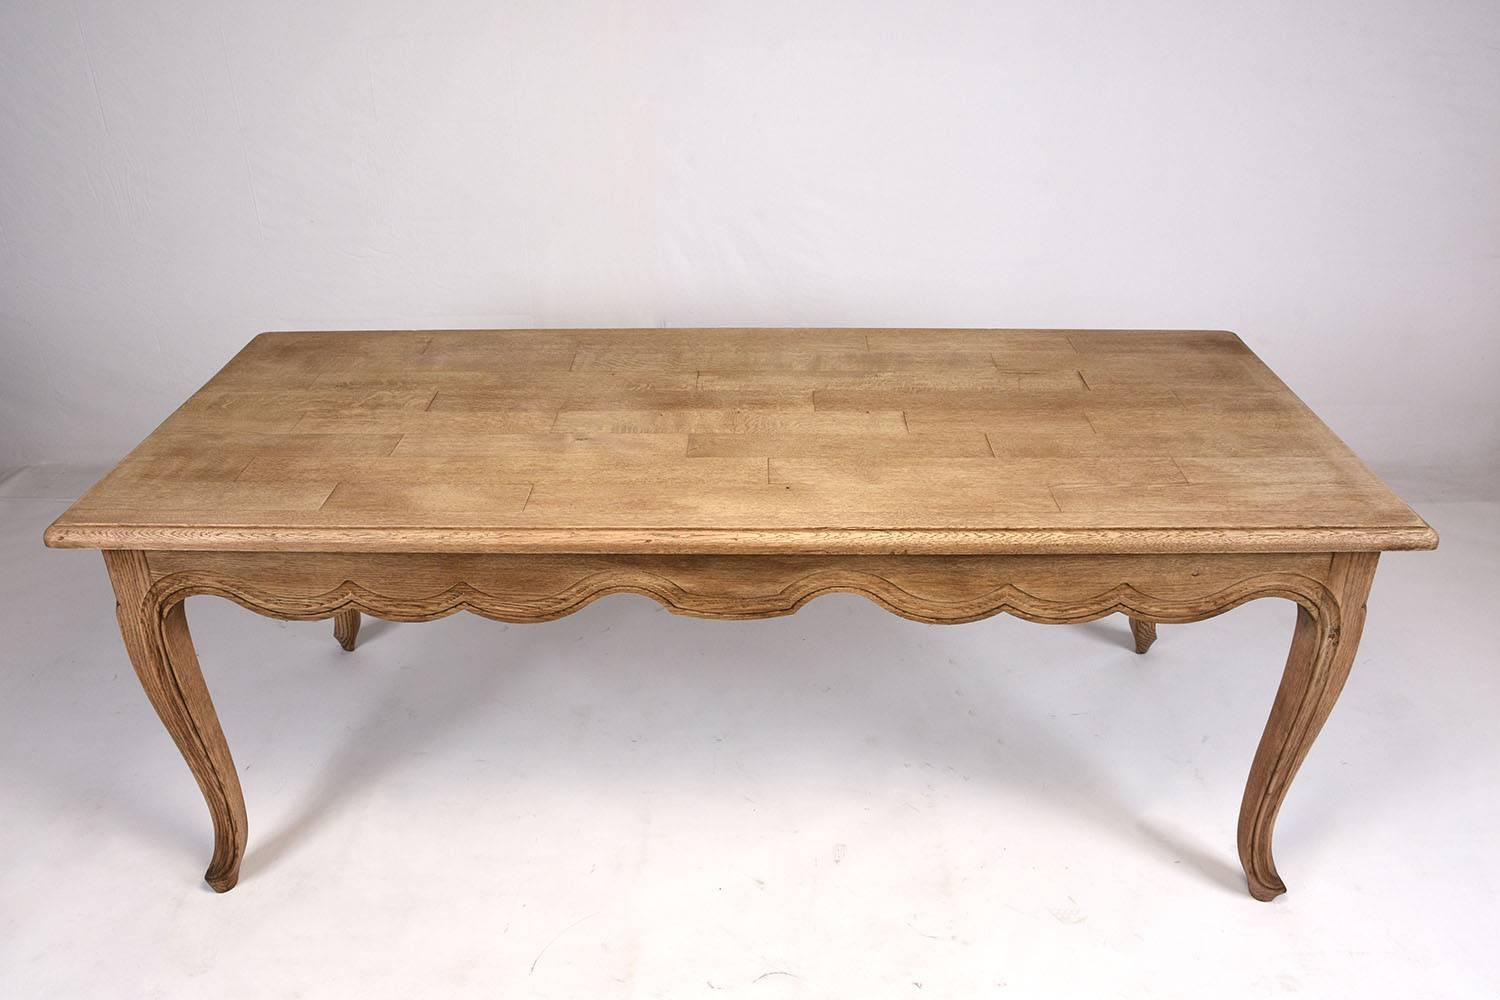 This 1970s French Provincial style dining table is made of oakwood with a intriguing bleached finish. This elegant table features carved serpentine legs with padded feet. Along the bottom edge of the table there is scallop trimming with carved